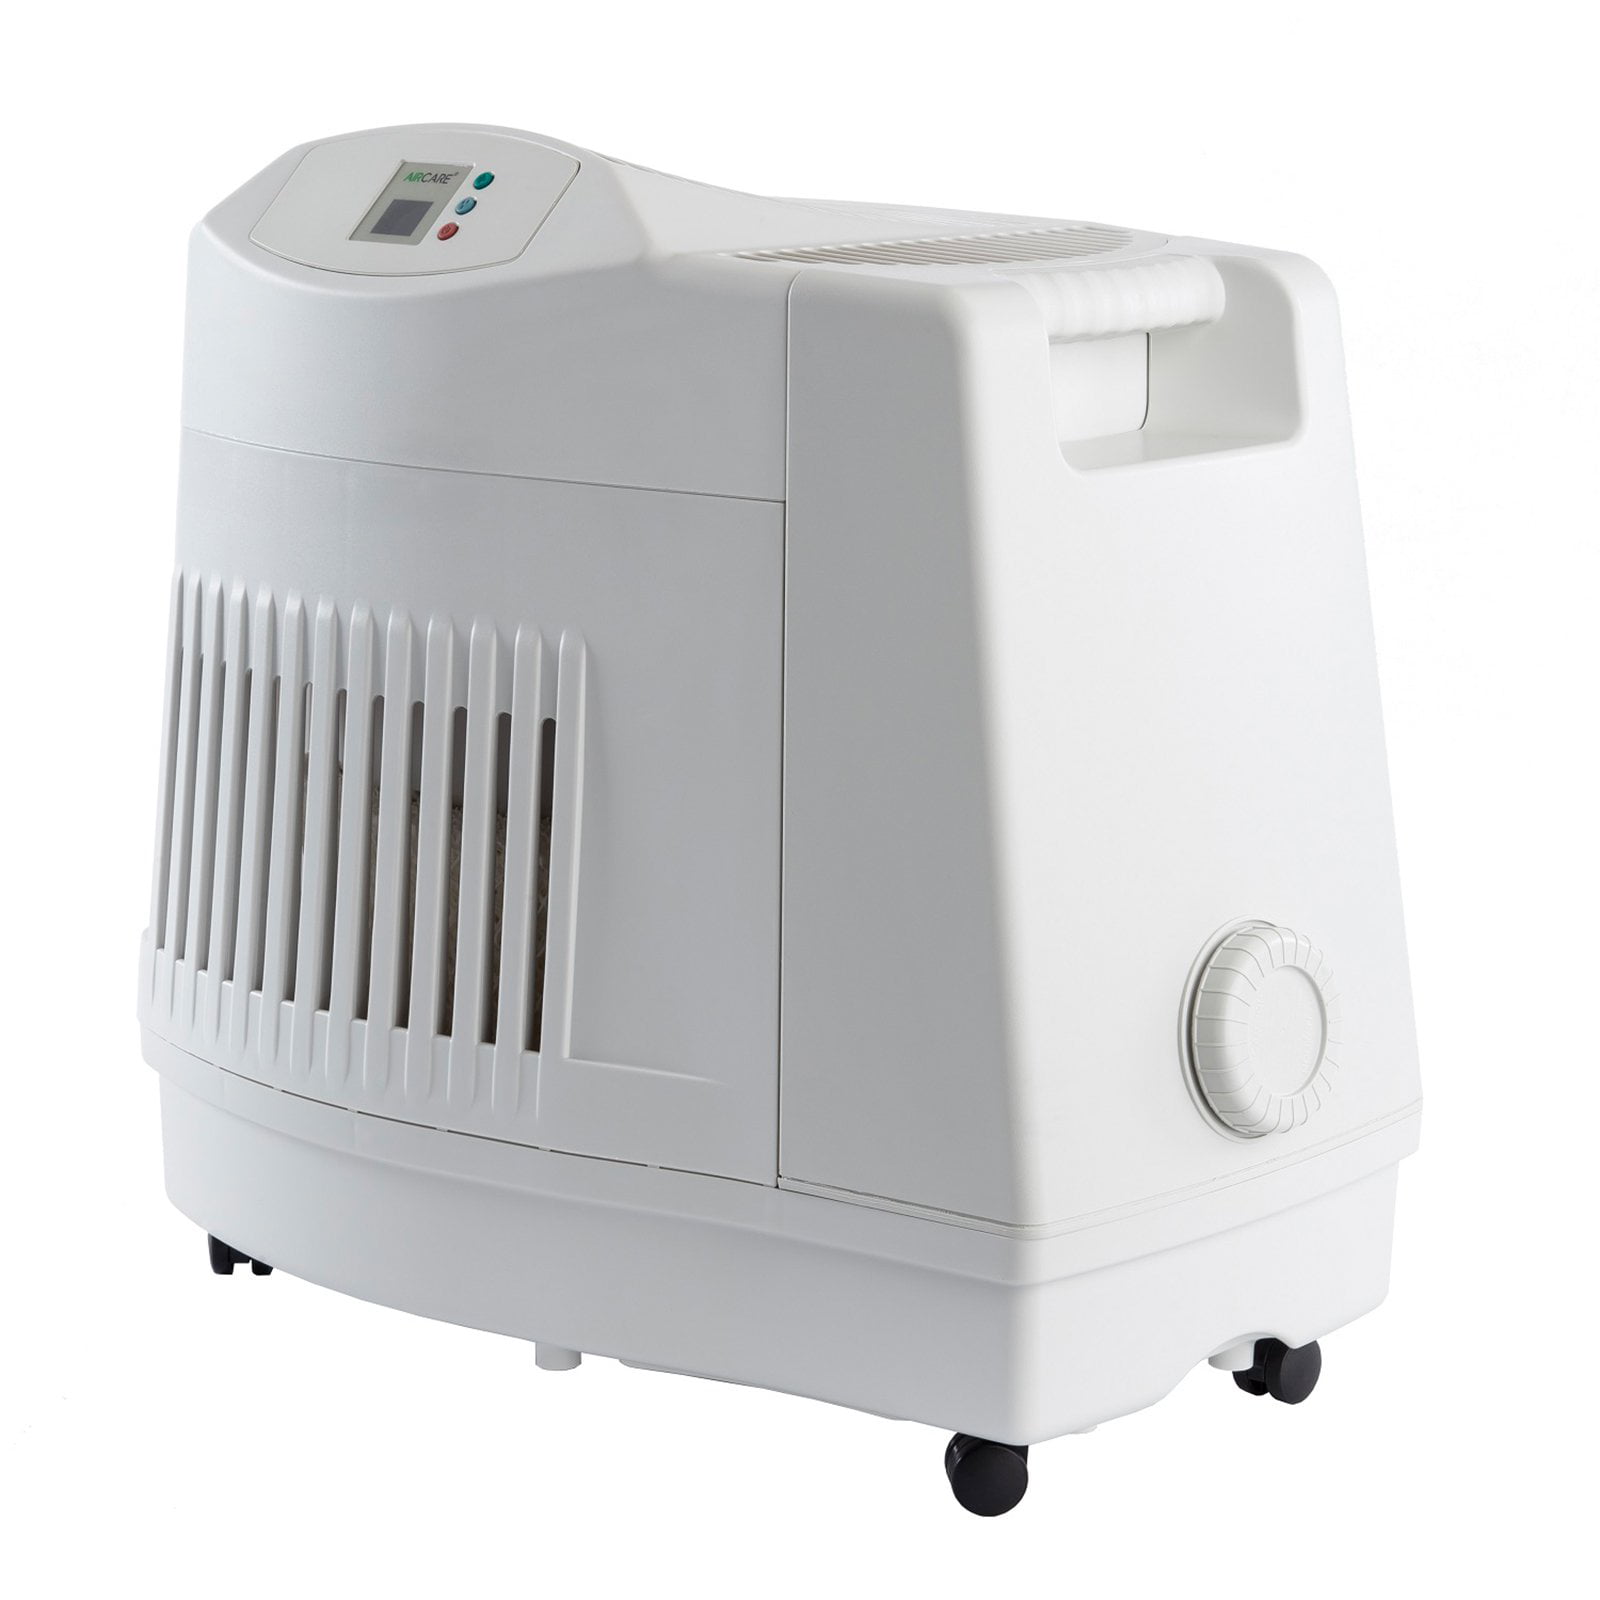 Our Best Humidifiers with Diffusers for Essential Oils - AIRCARE - AIRCARE  Ultrasonic, Evaporative, & Steam Humidifiers